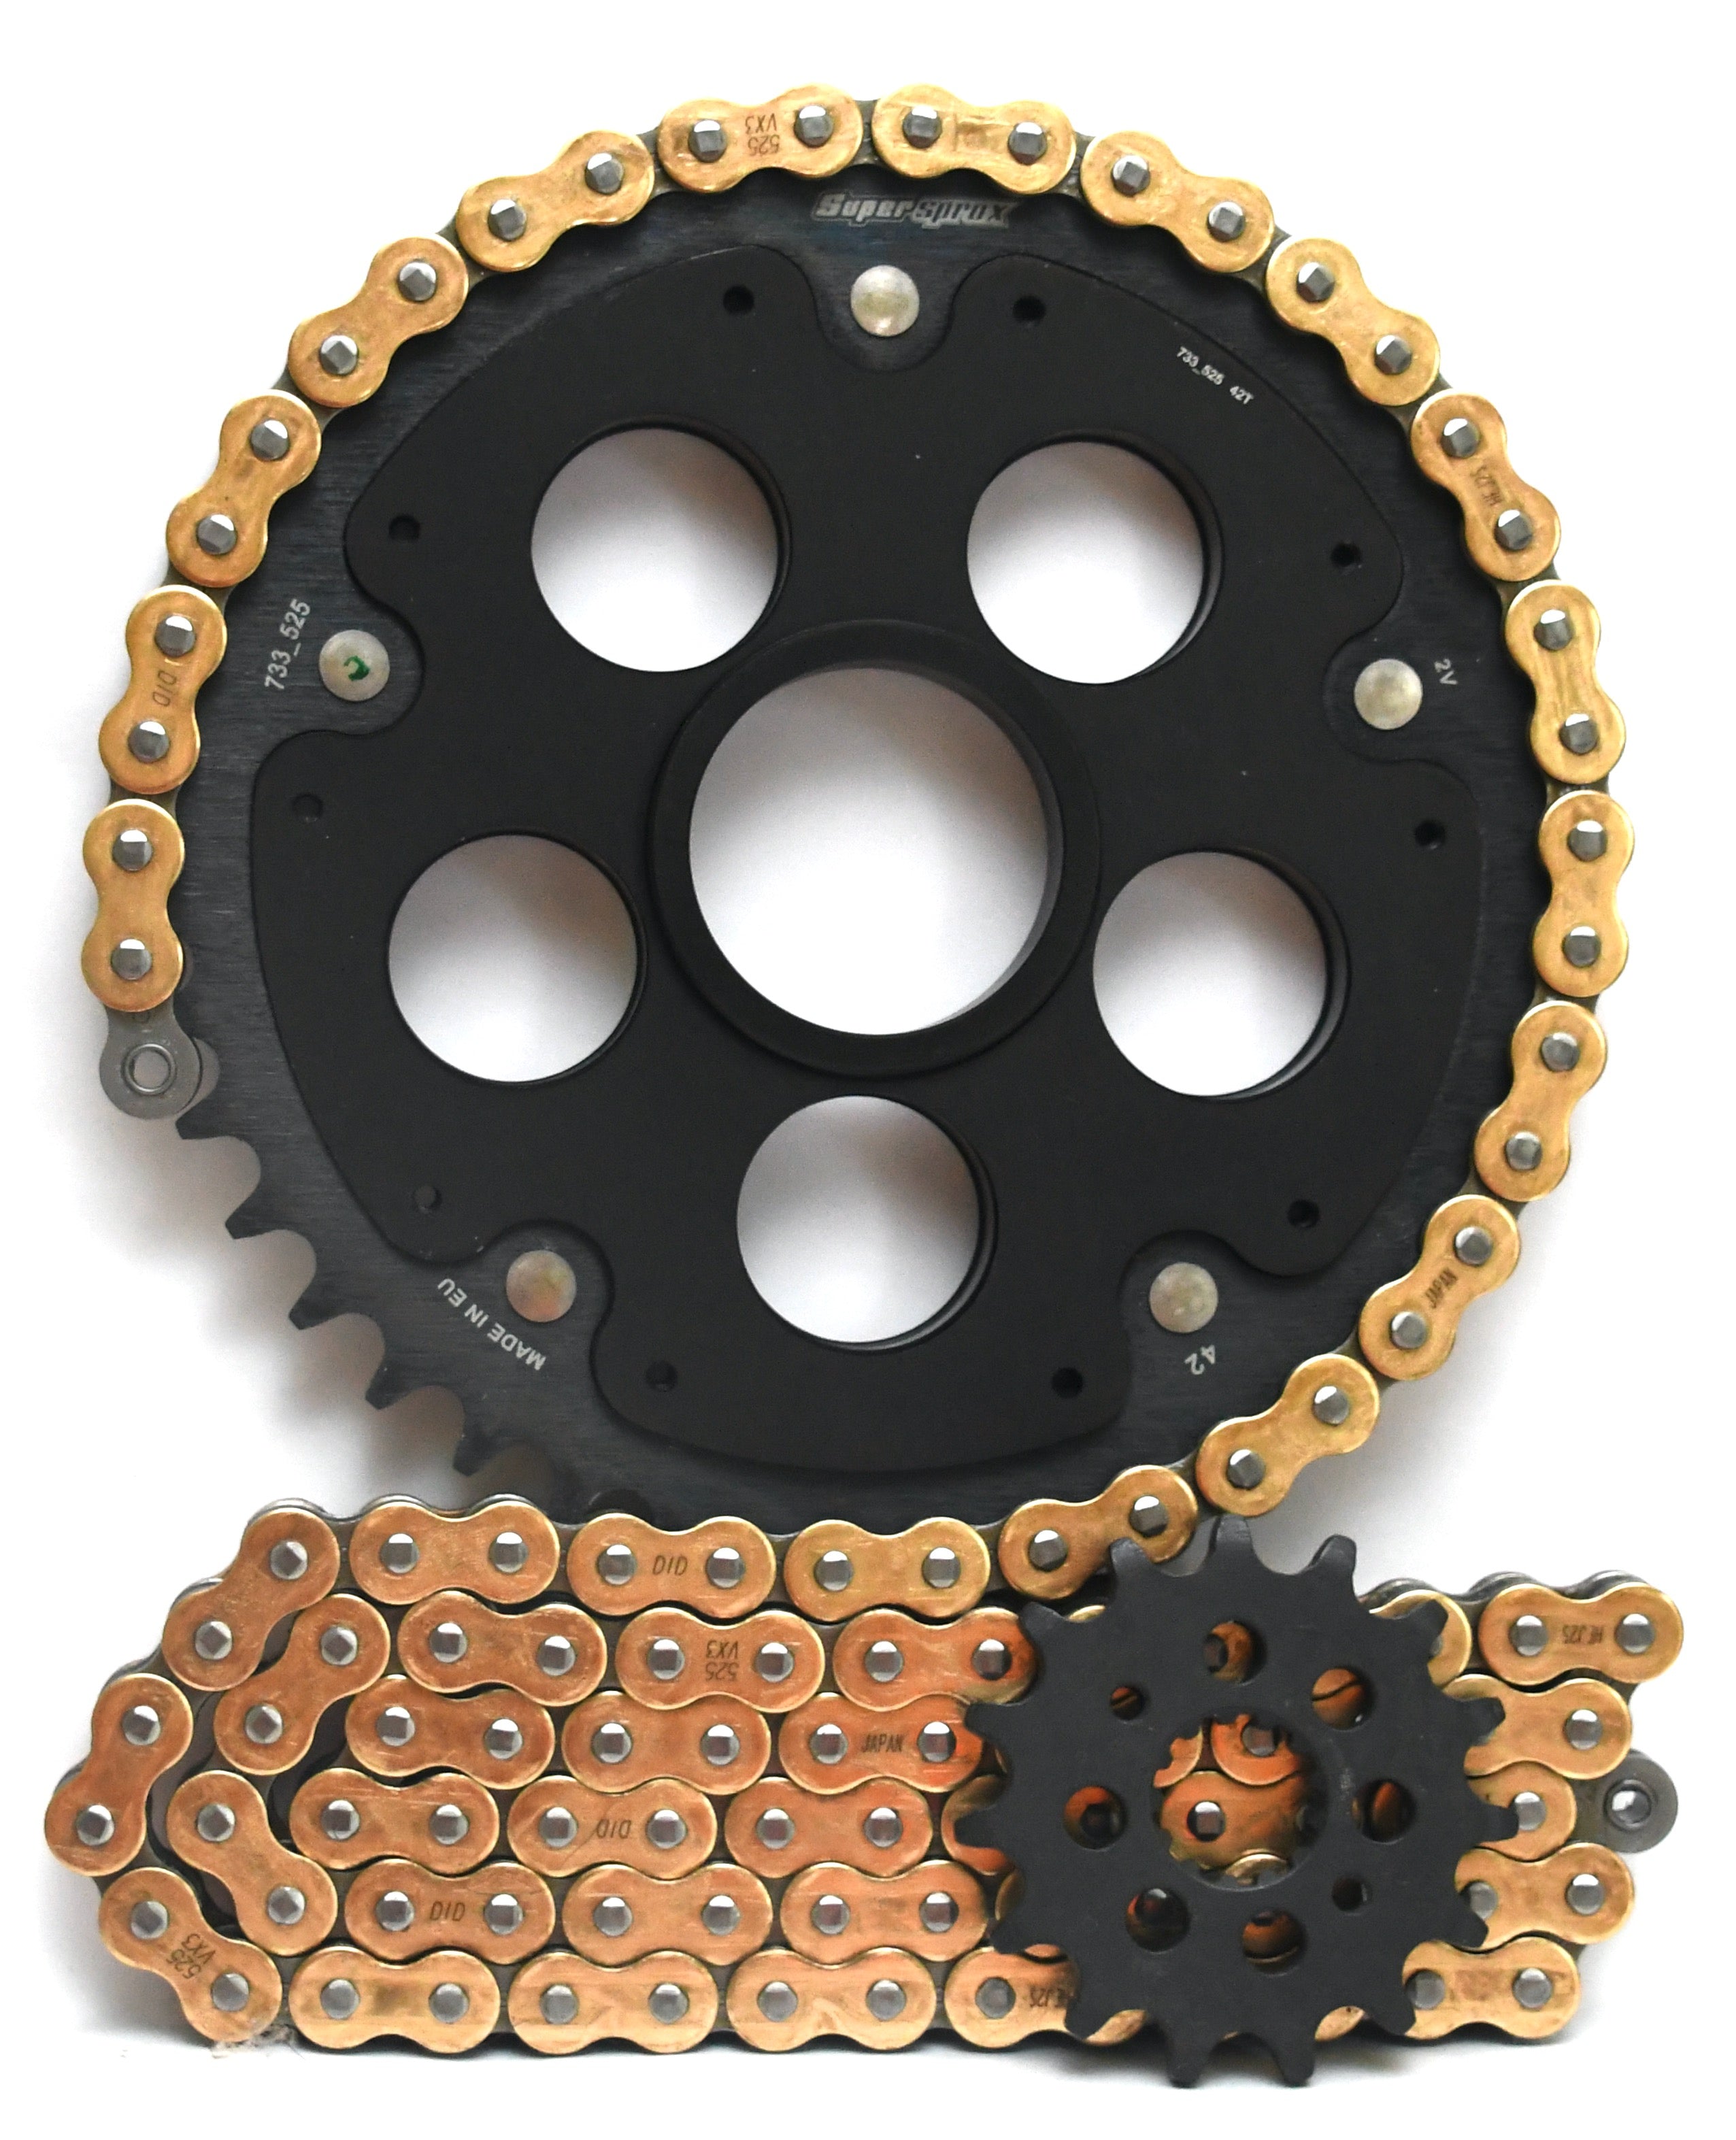 Supersprox Chain & Sprocket Kit for Ducati 796 Hypermotard 2010-2012 - Standard Gearing